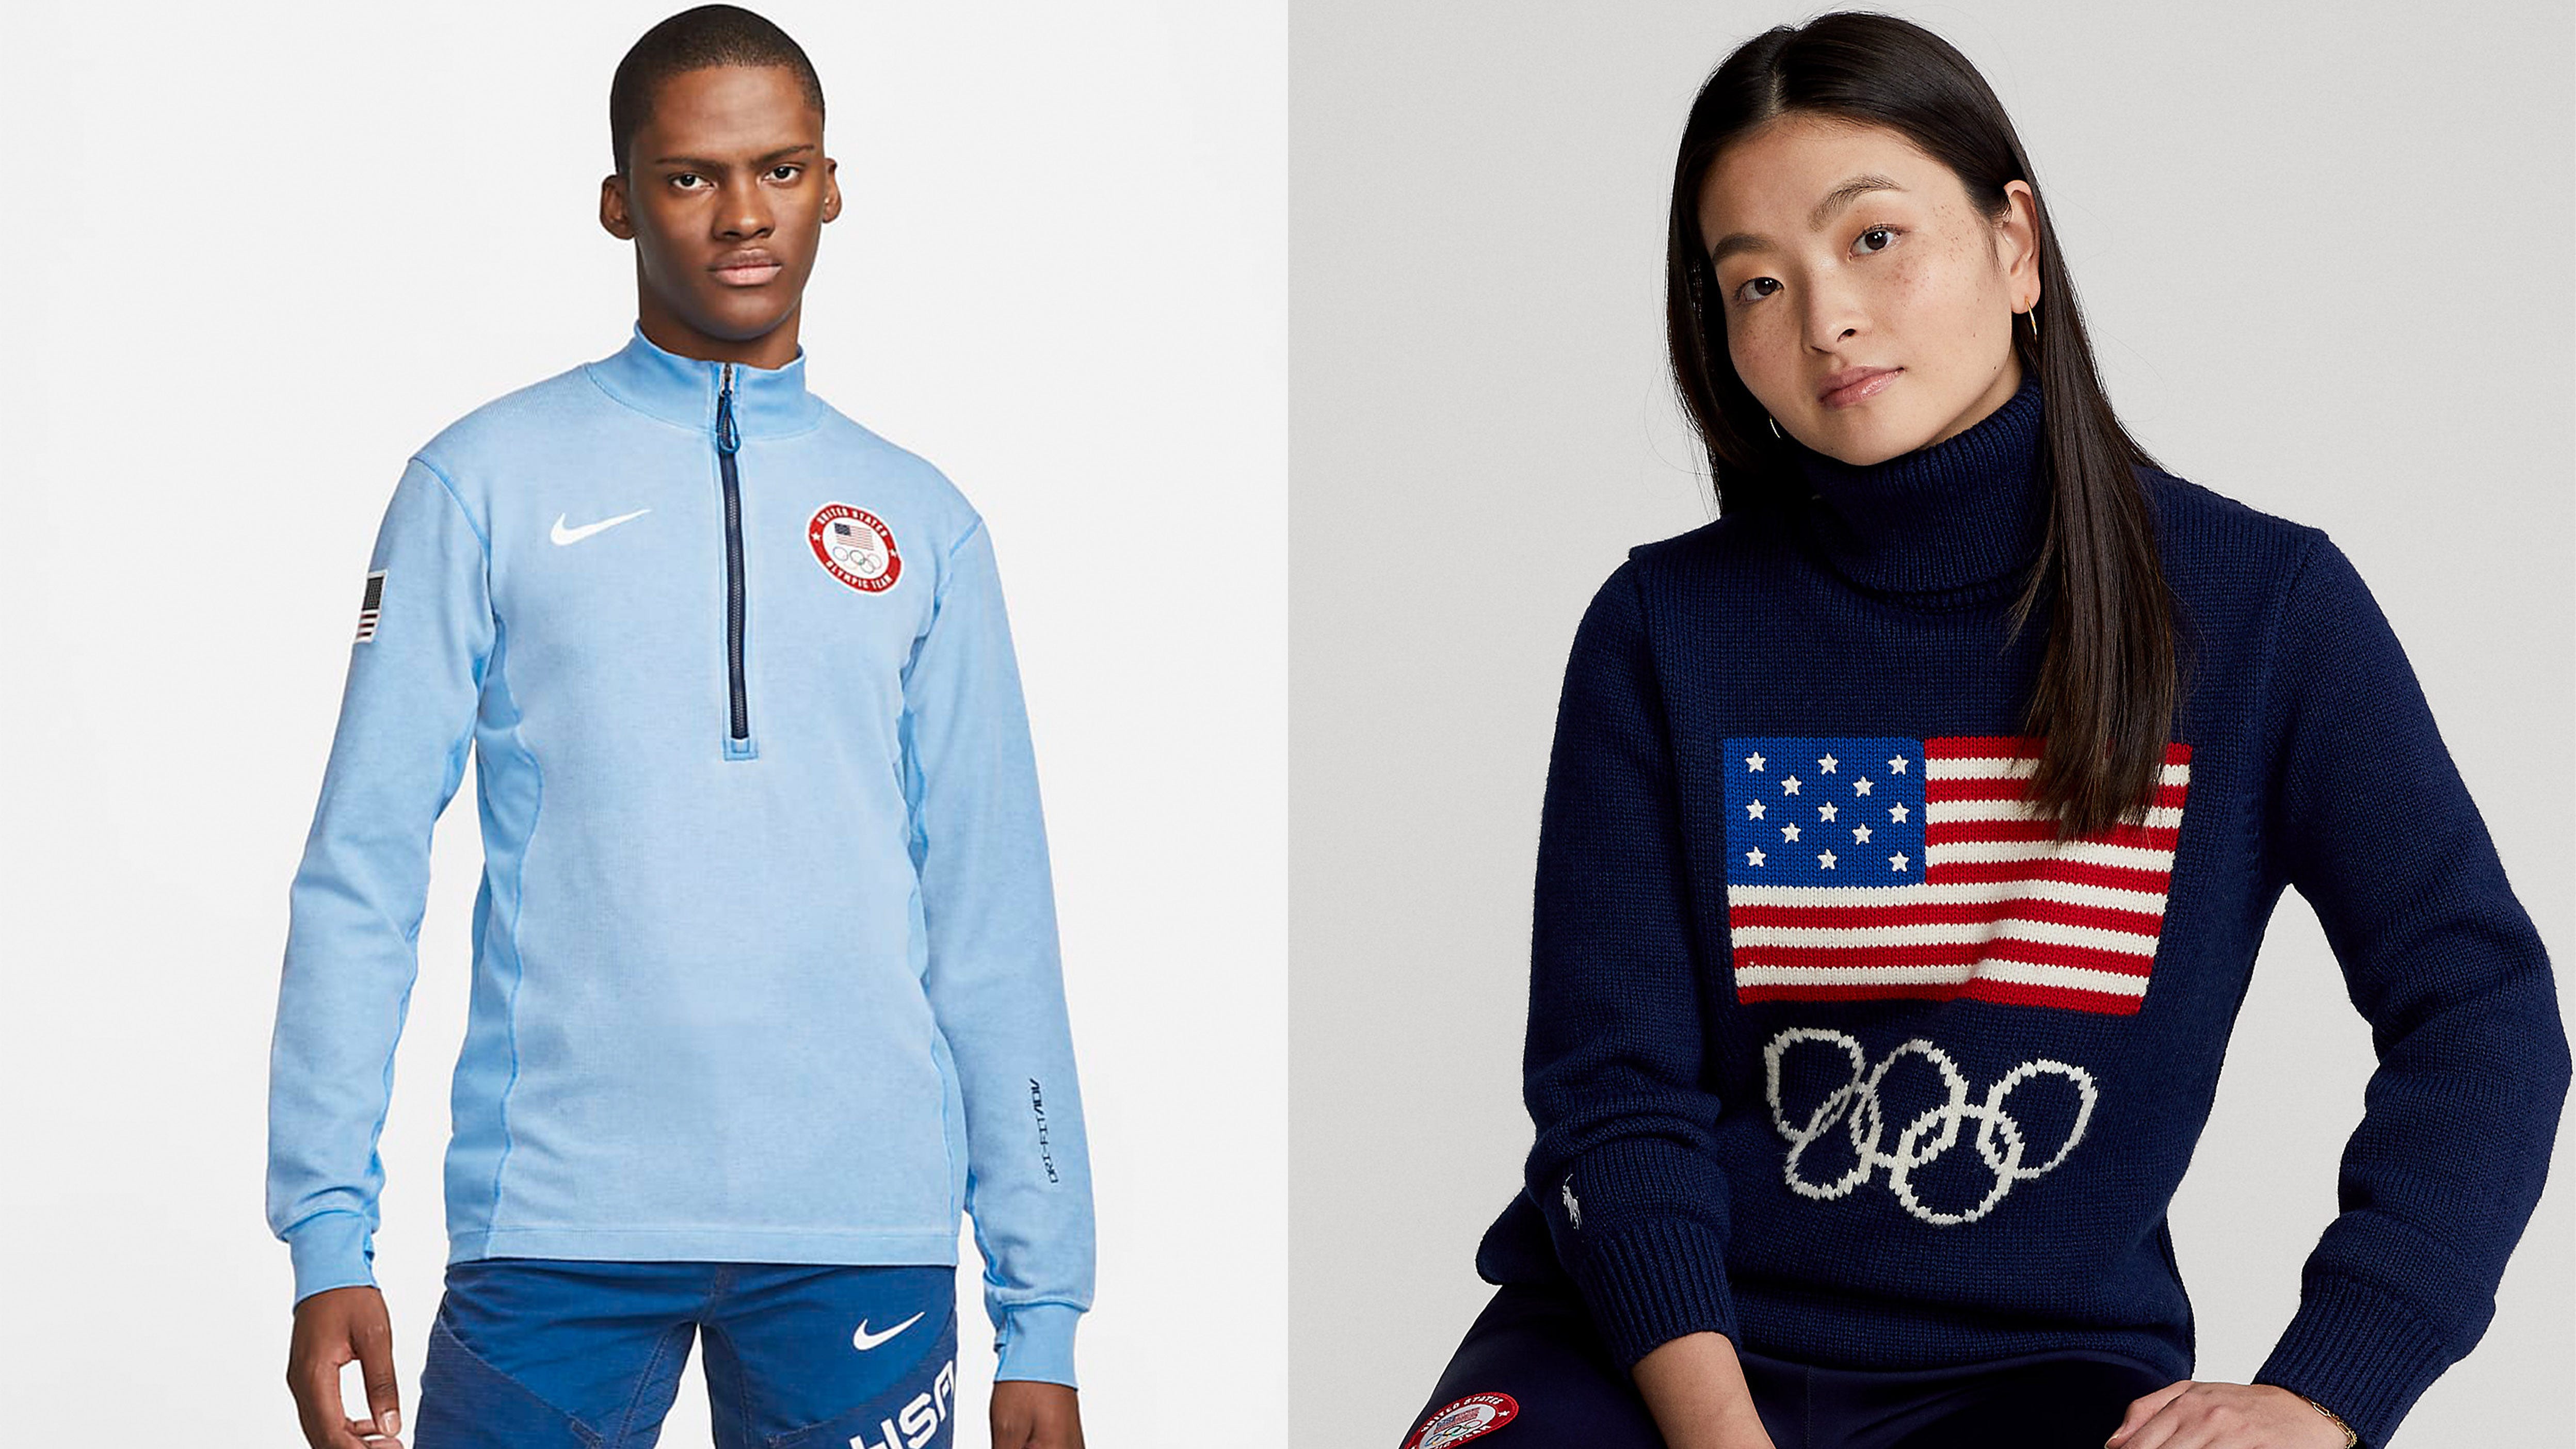 Olympic 2022: Cold weather workout gear